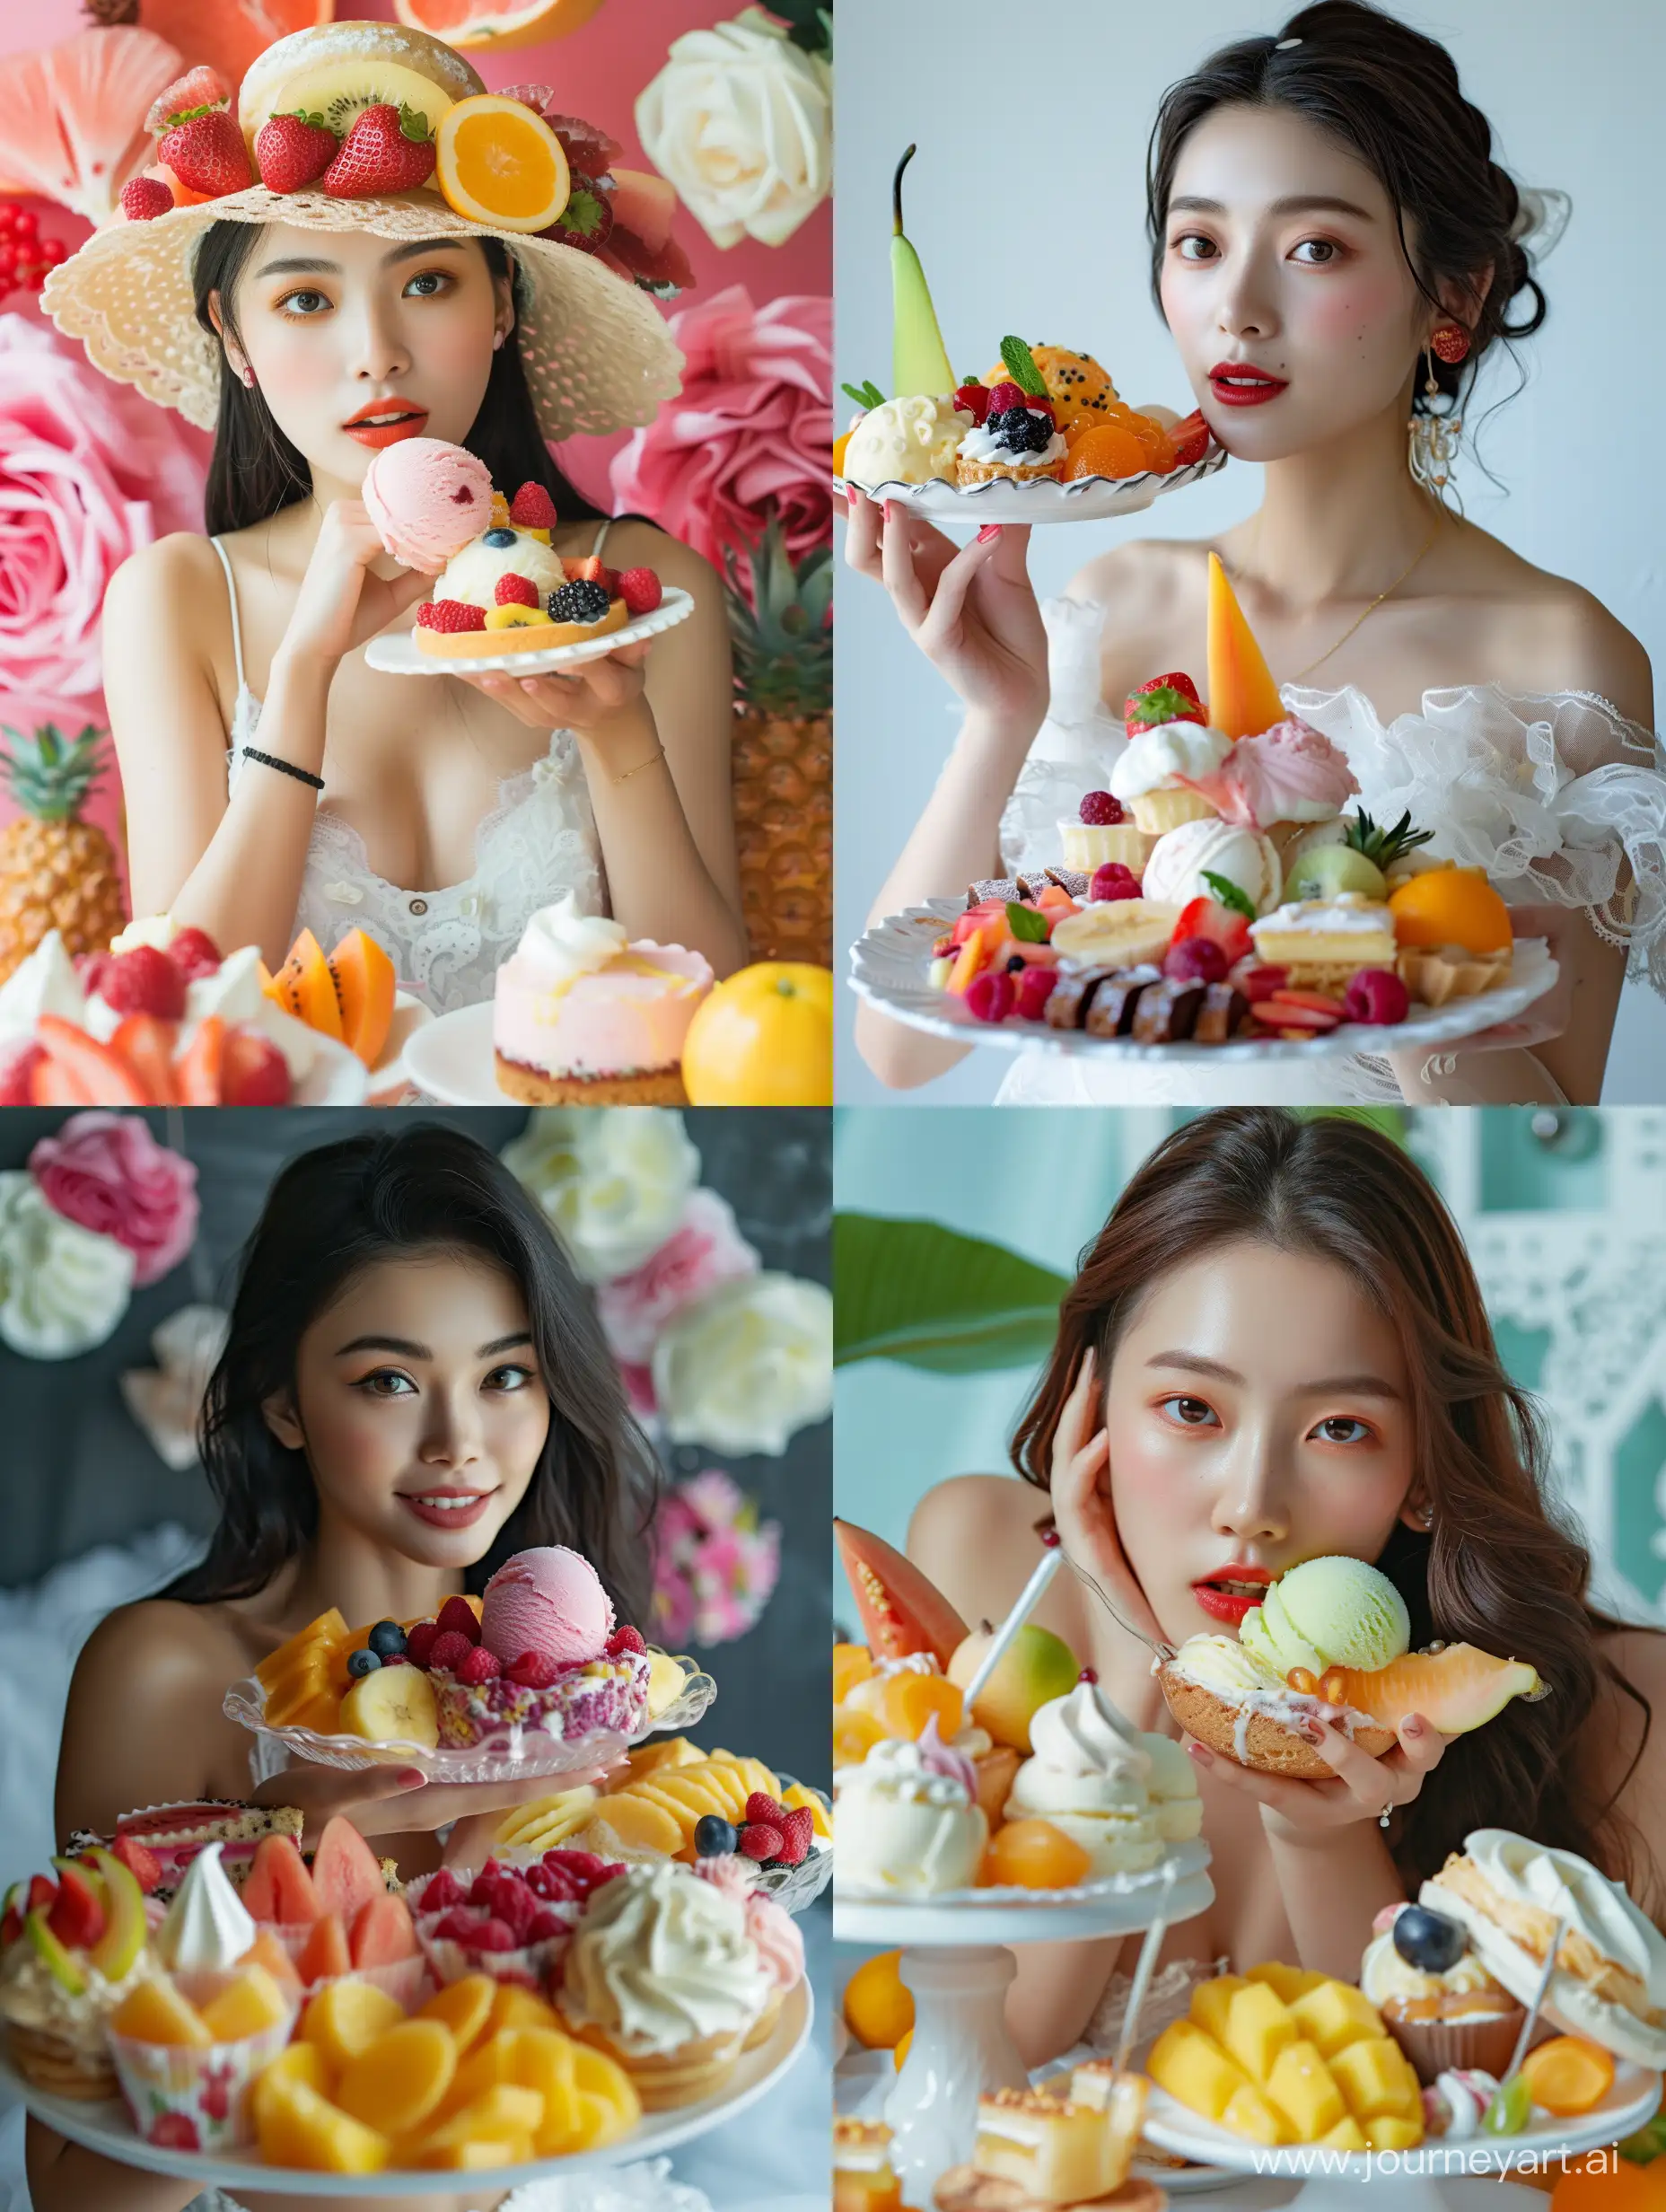 Beautiful Asia Woman Enjoying a Feast of Fruits Ice Cream and Cakes